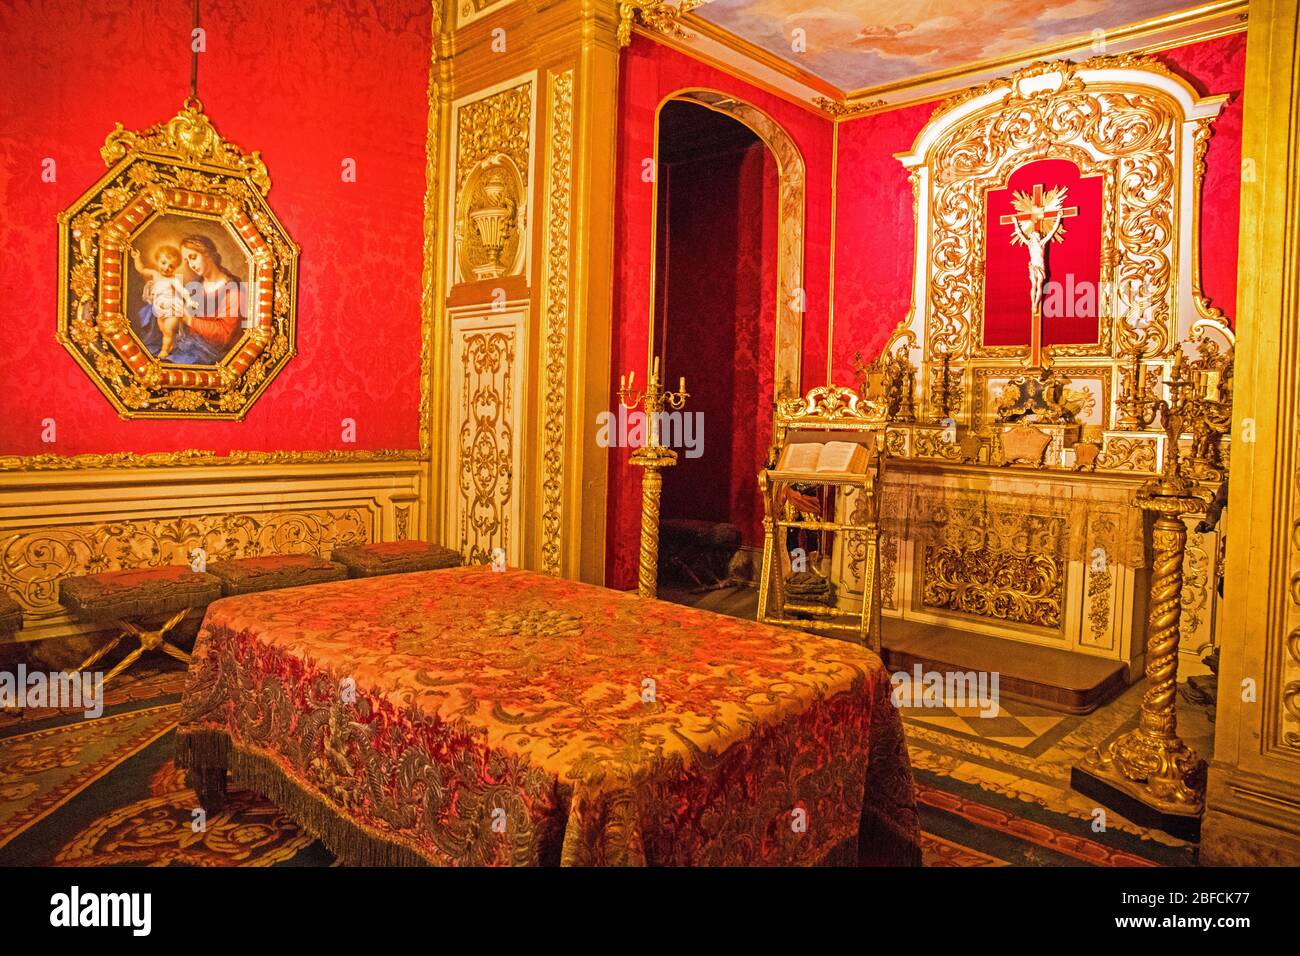 A bedchamber in Pitti Palace in Florence Italy Stock Photo